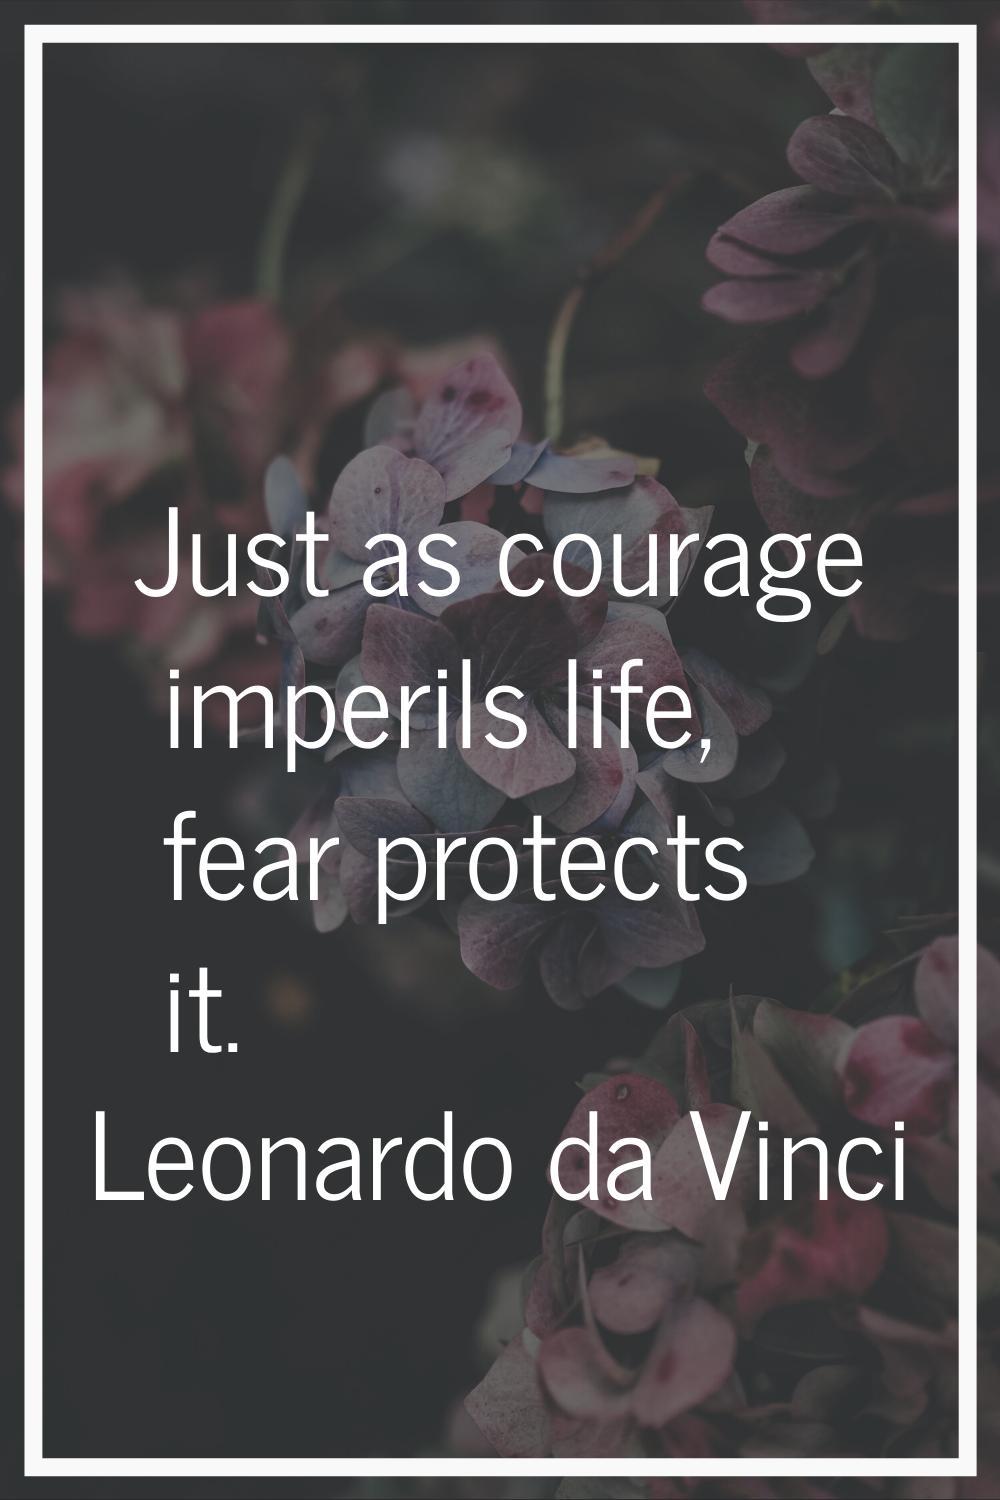 Just as courage imperils life, fear protects it.